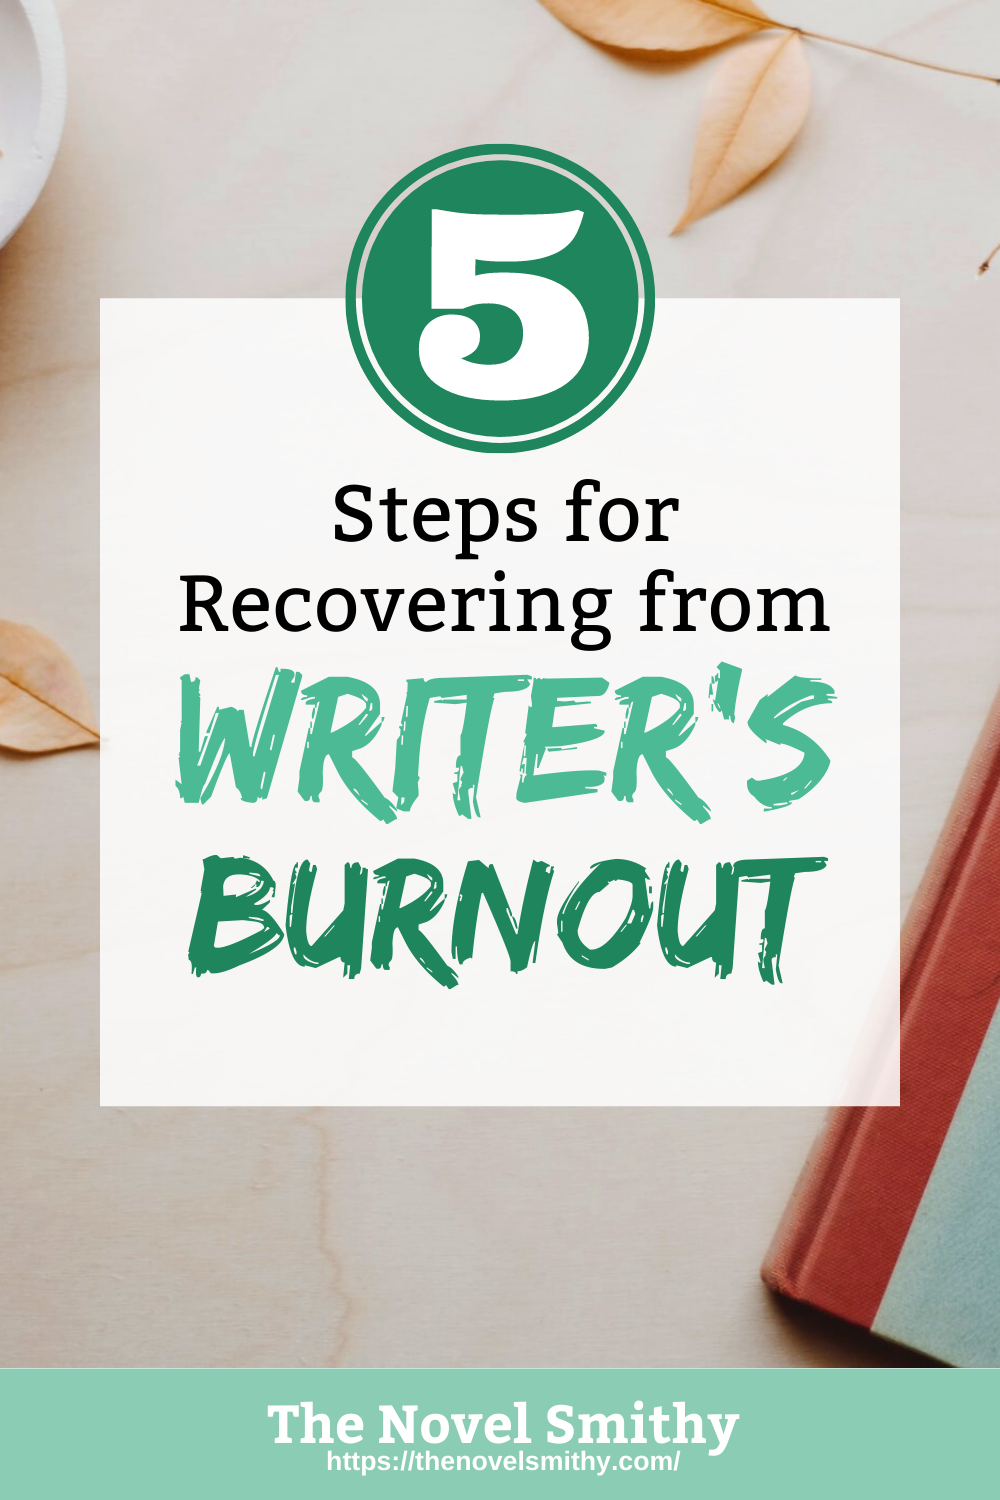 5 Steps for Recovering from Writer’s Burnout